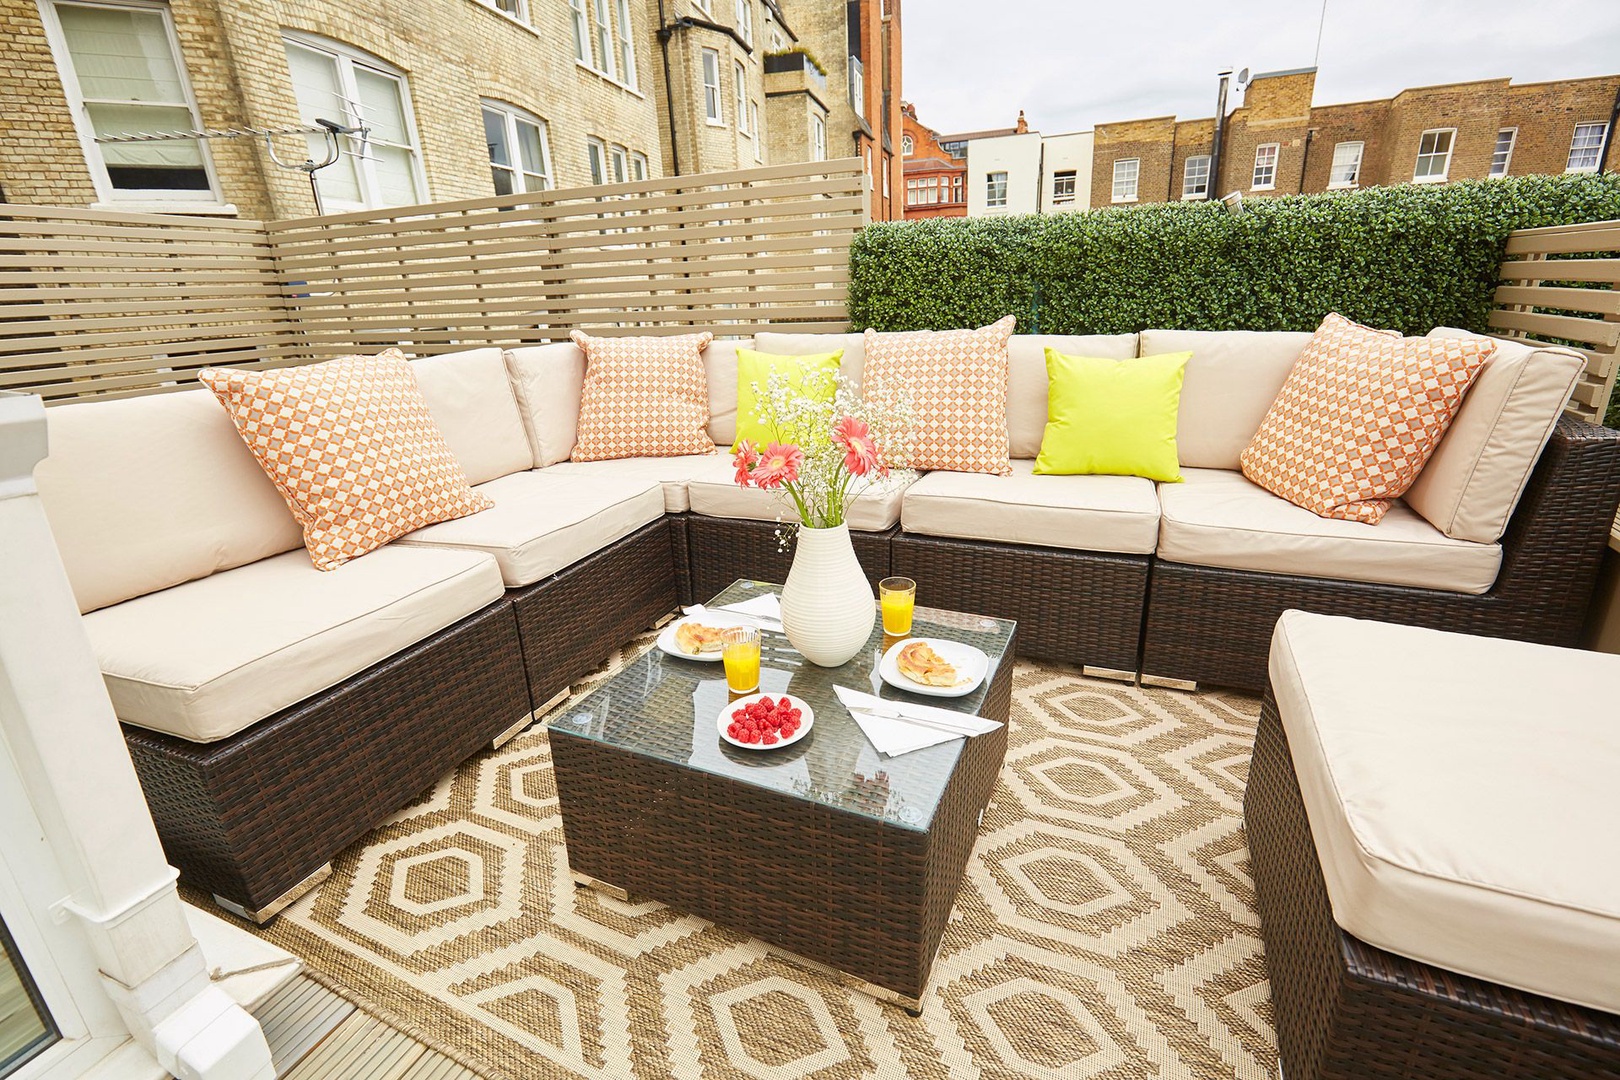 Comfortable seating on the terrace